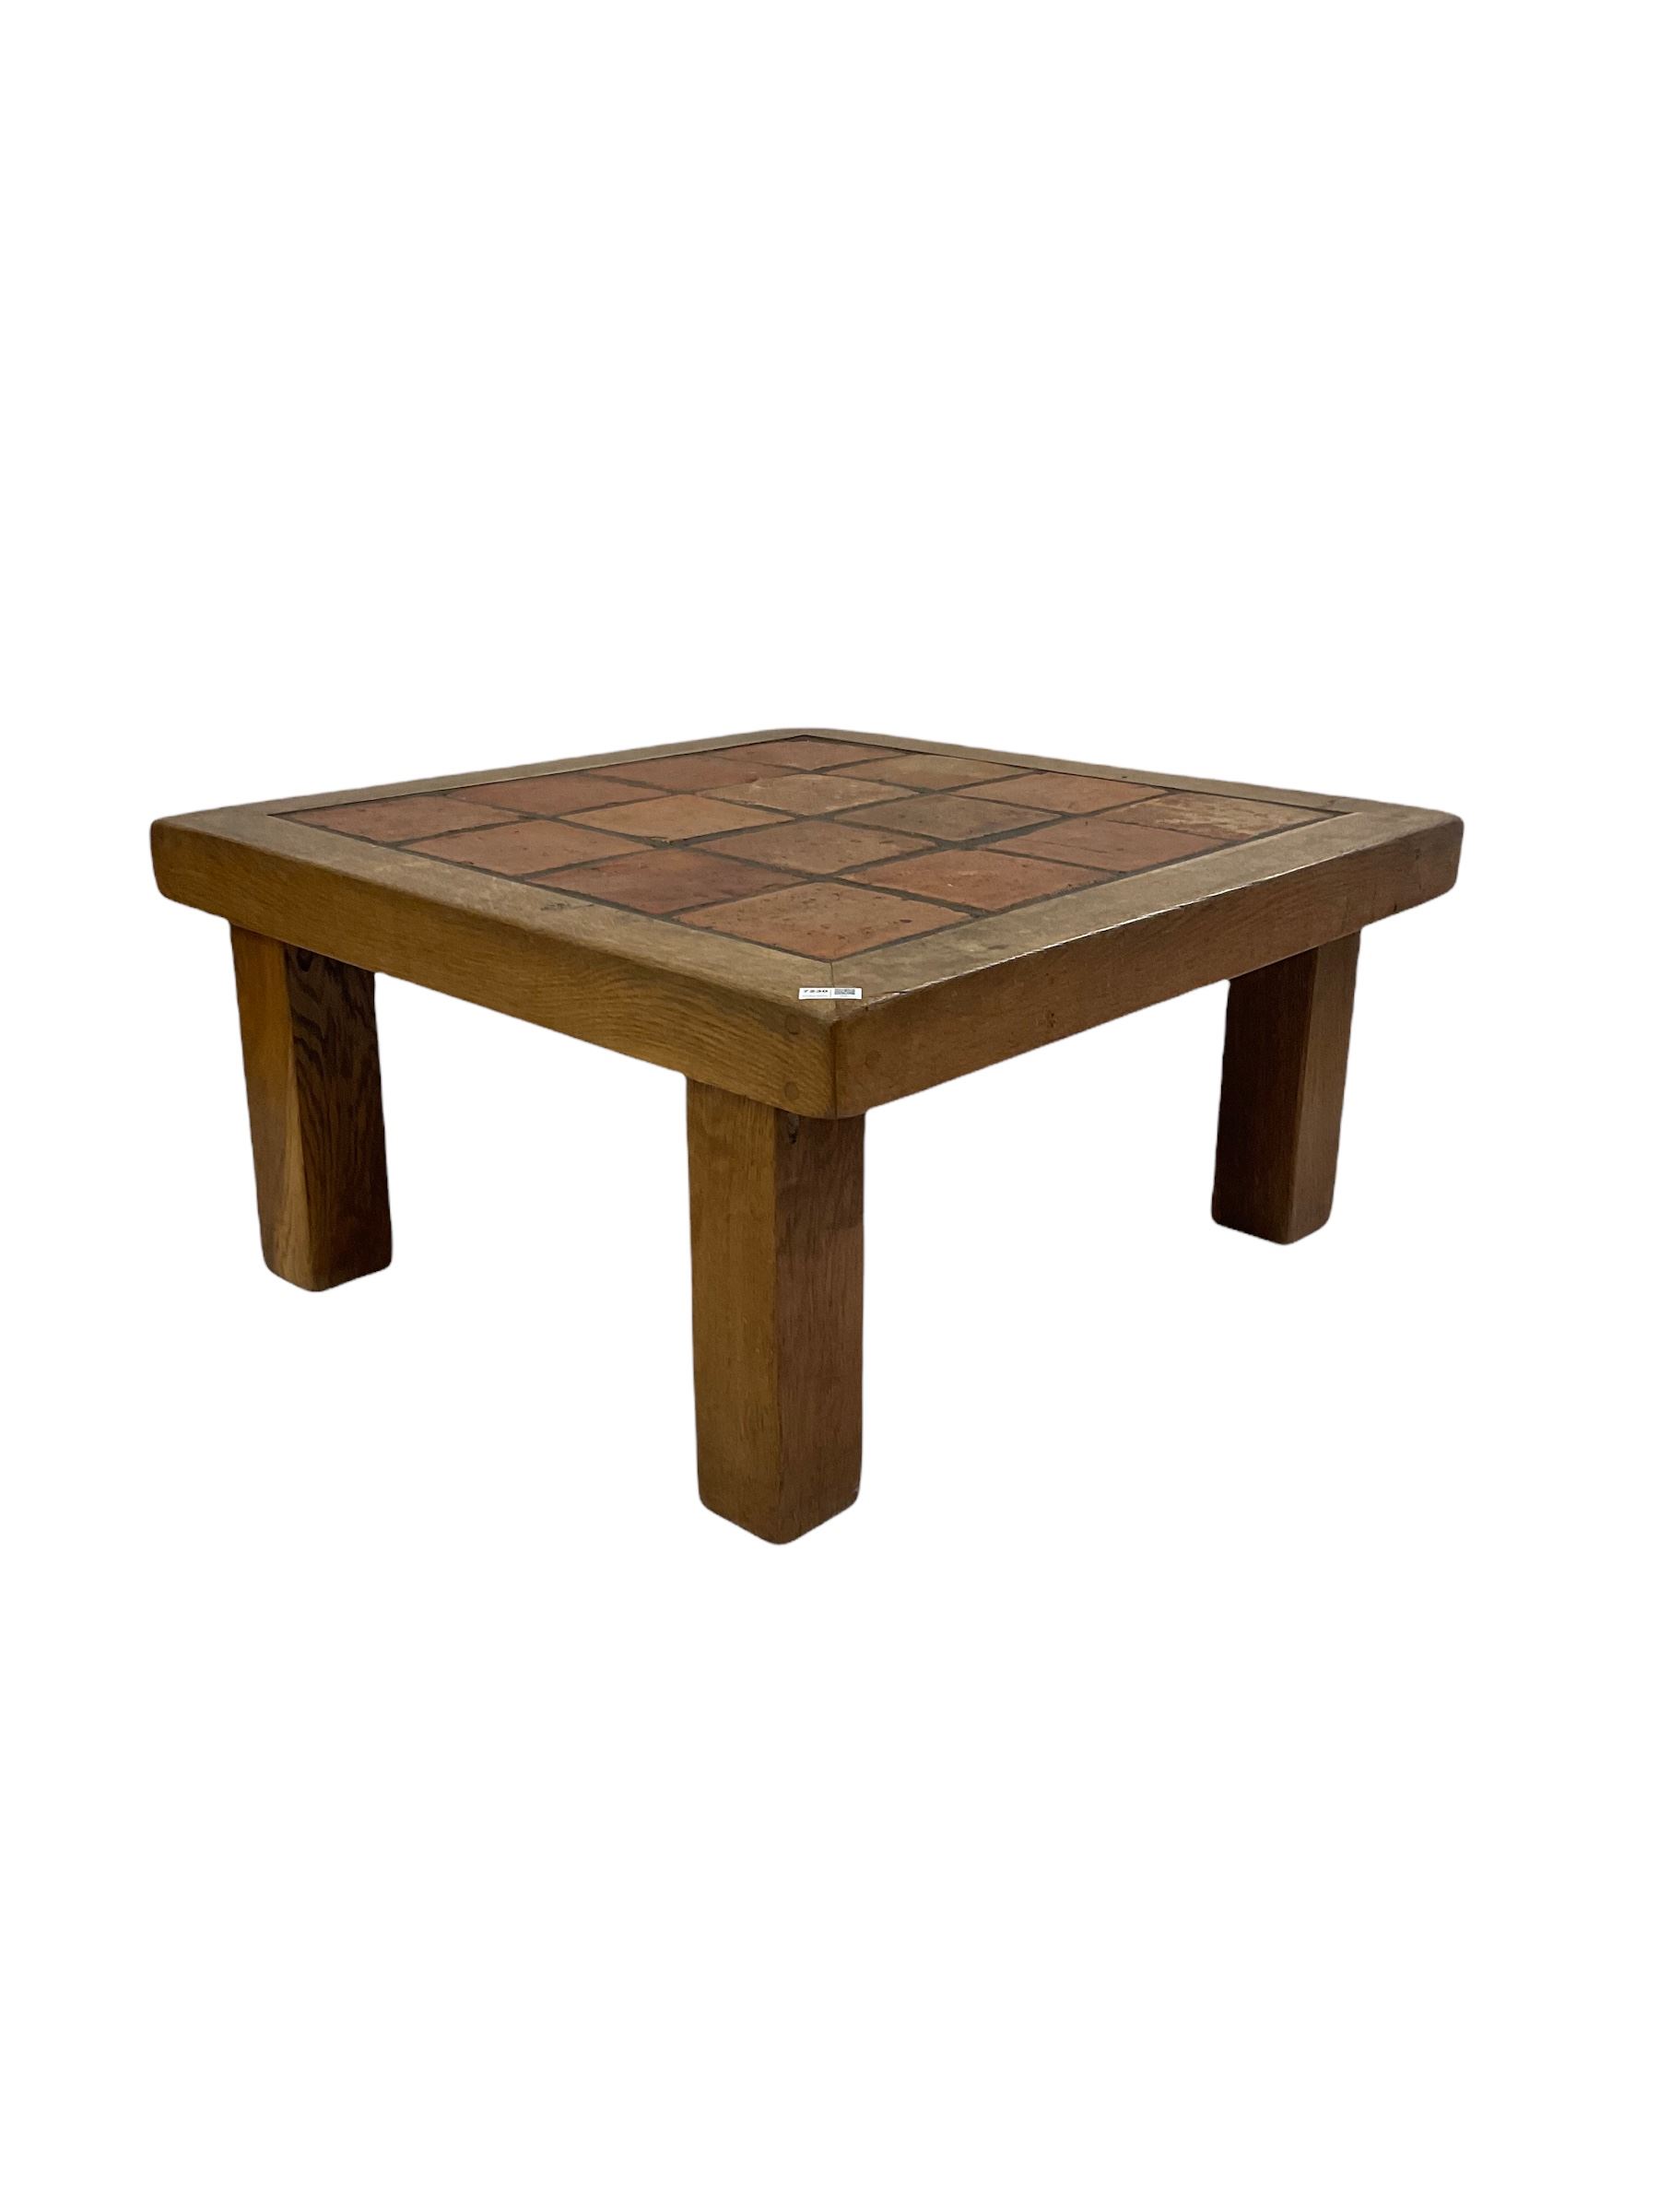 Oak and terracotta tiled coffee table